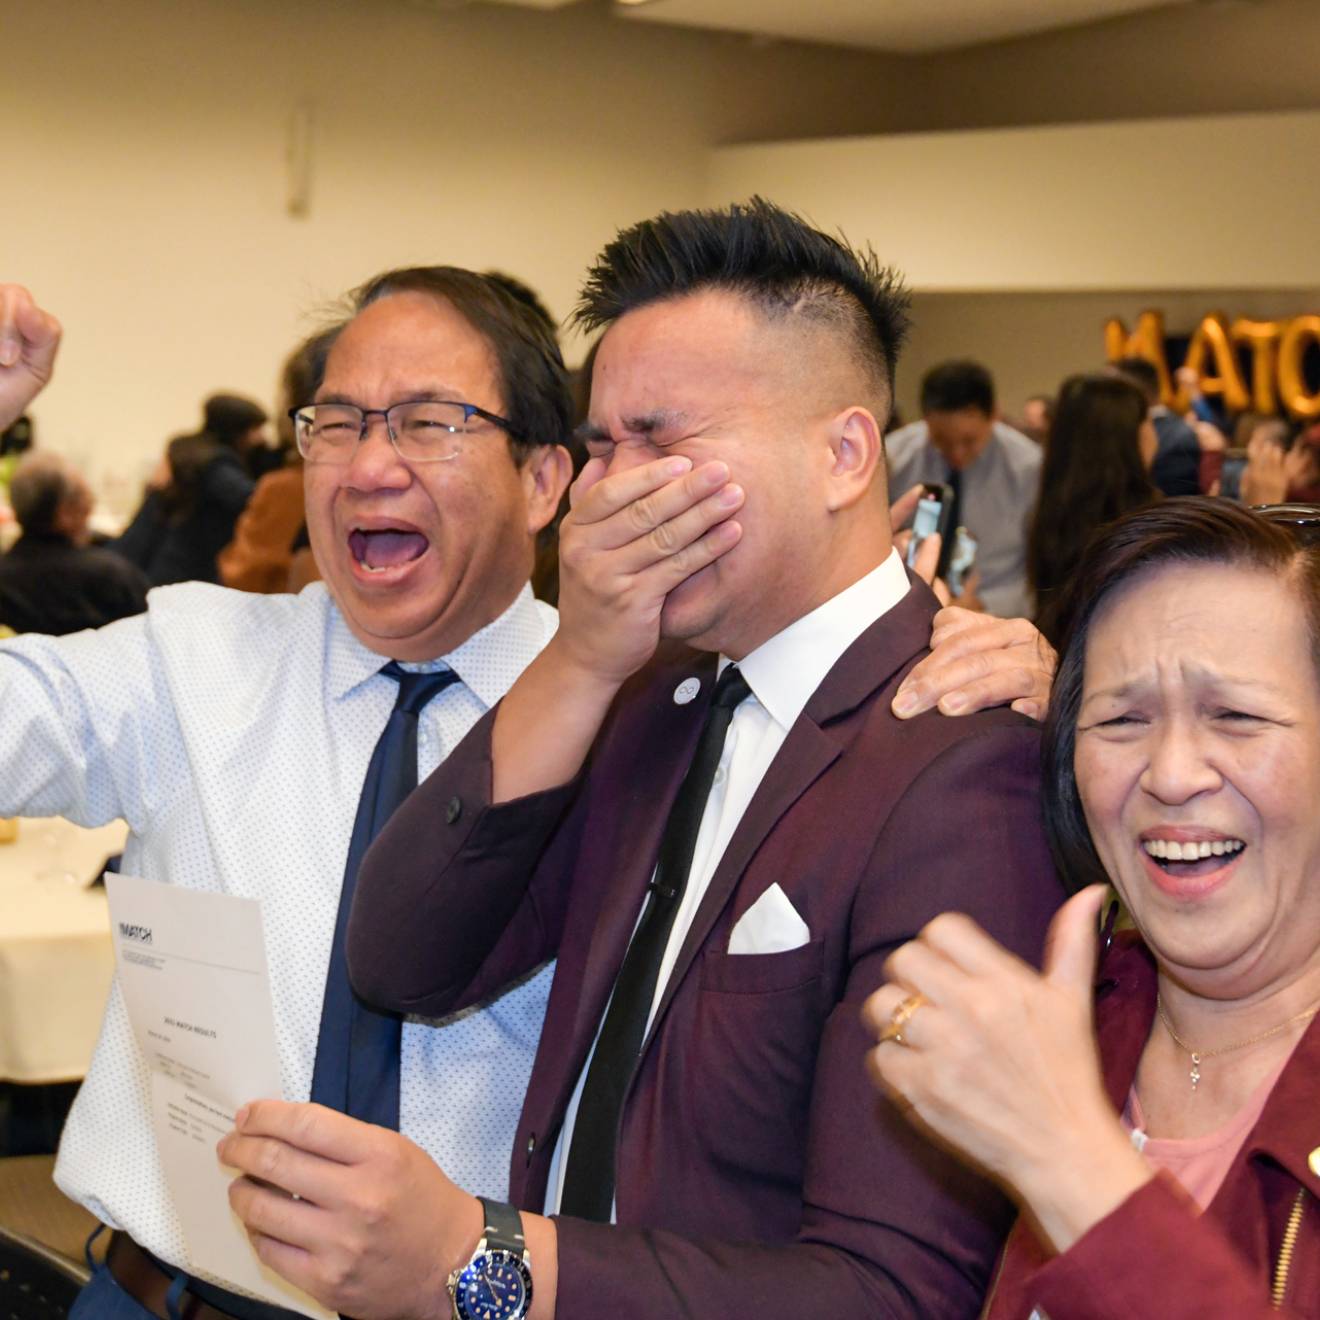 A UC Riverside medical student holds his hand over his mouth in excitement, flanked by his parents, on Match Day